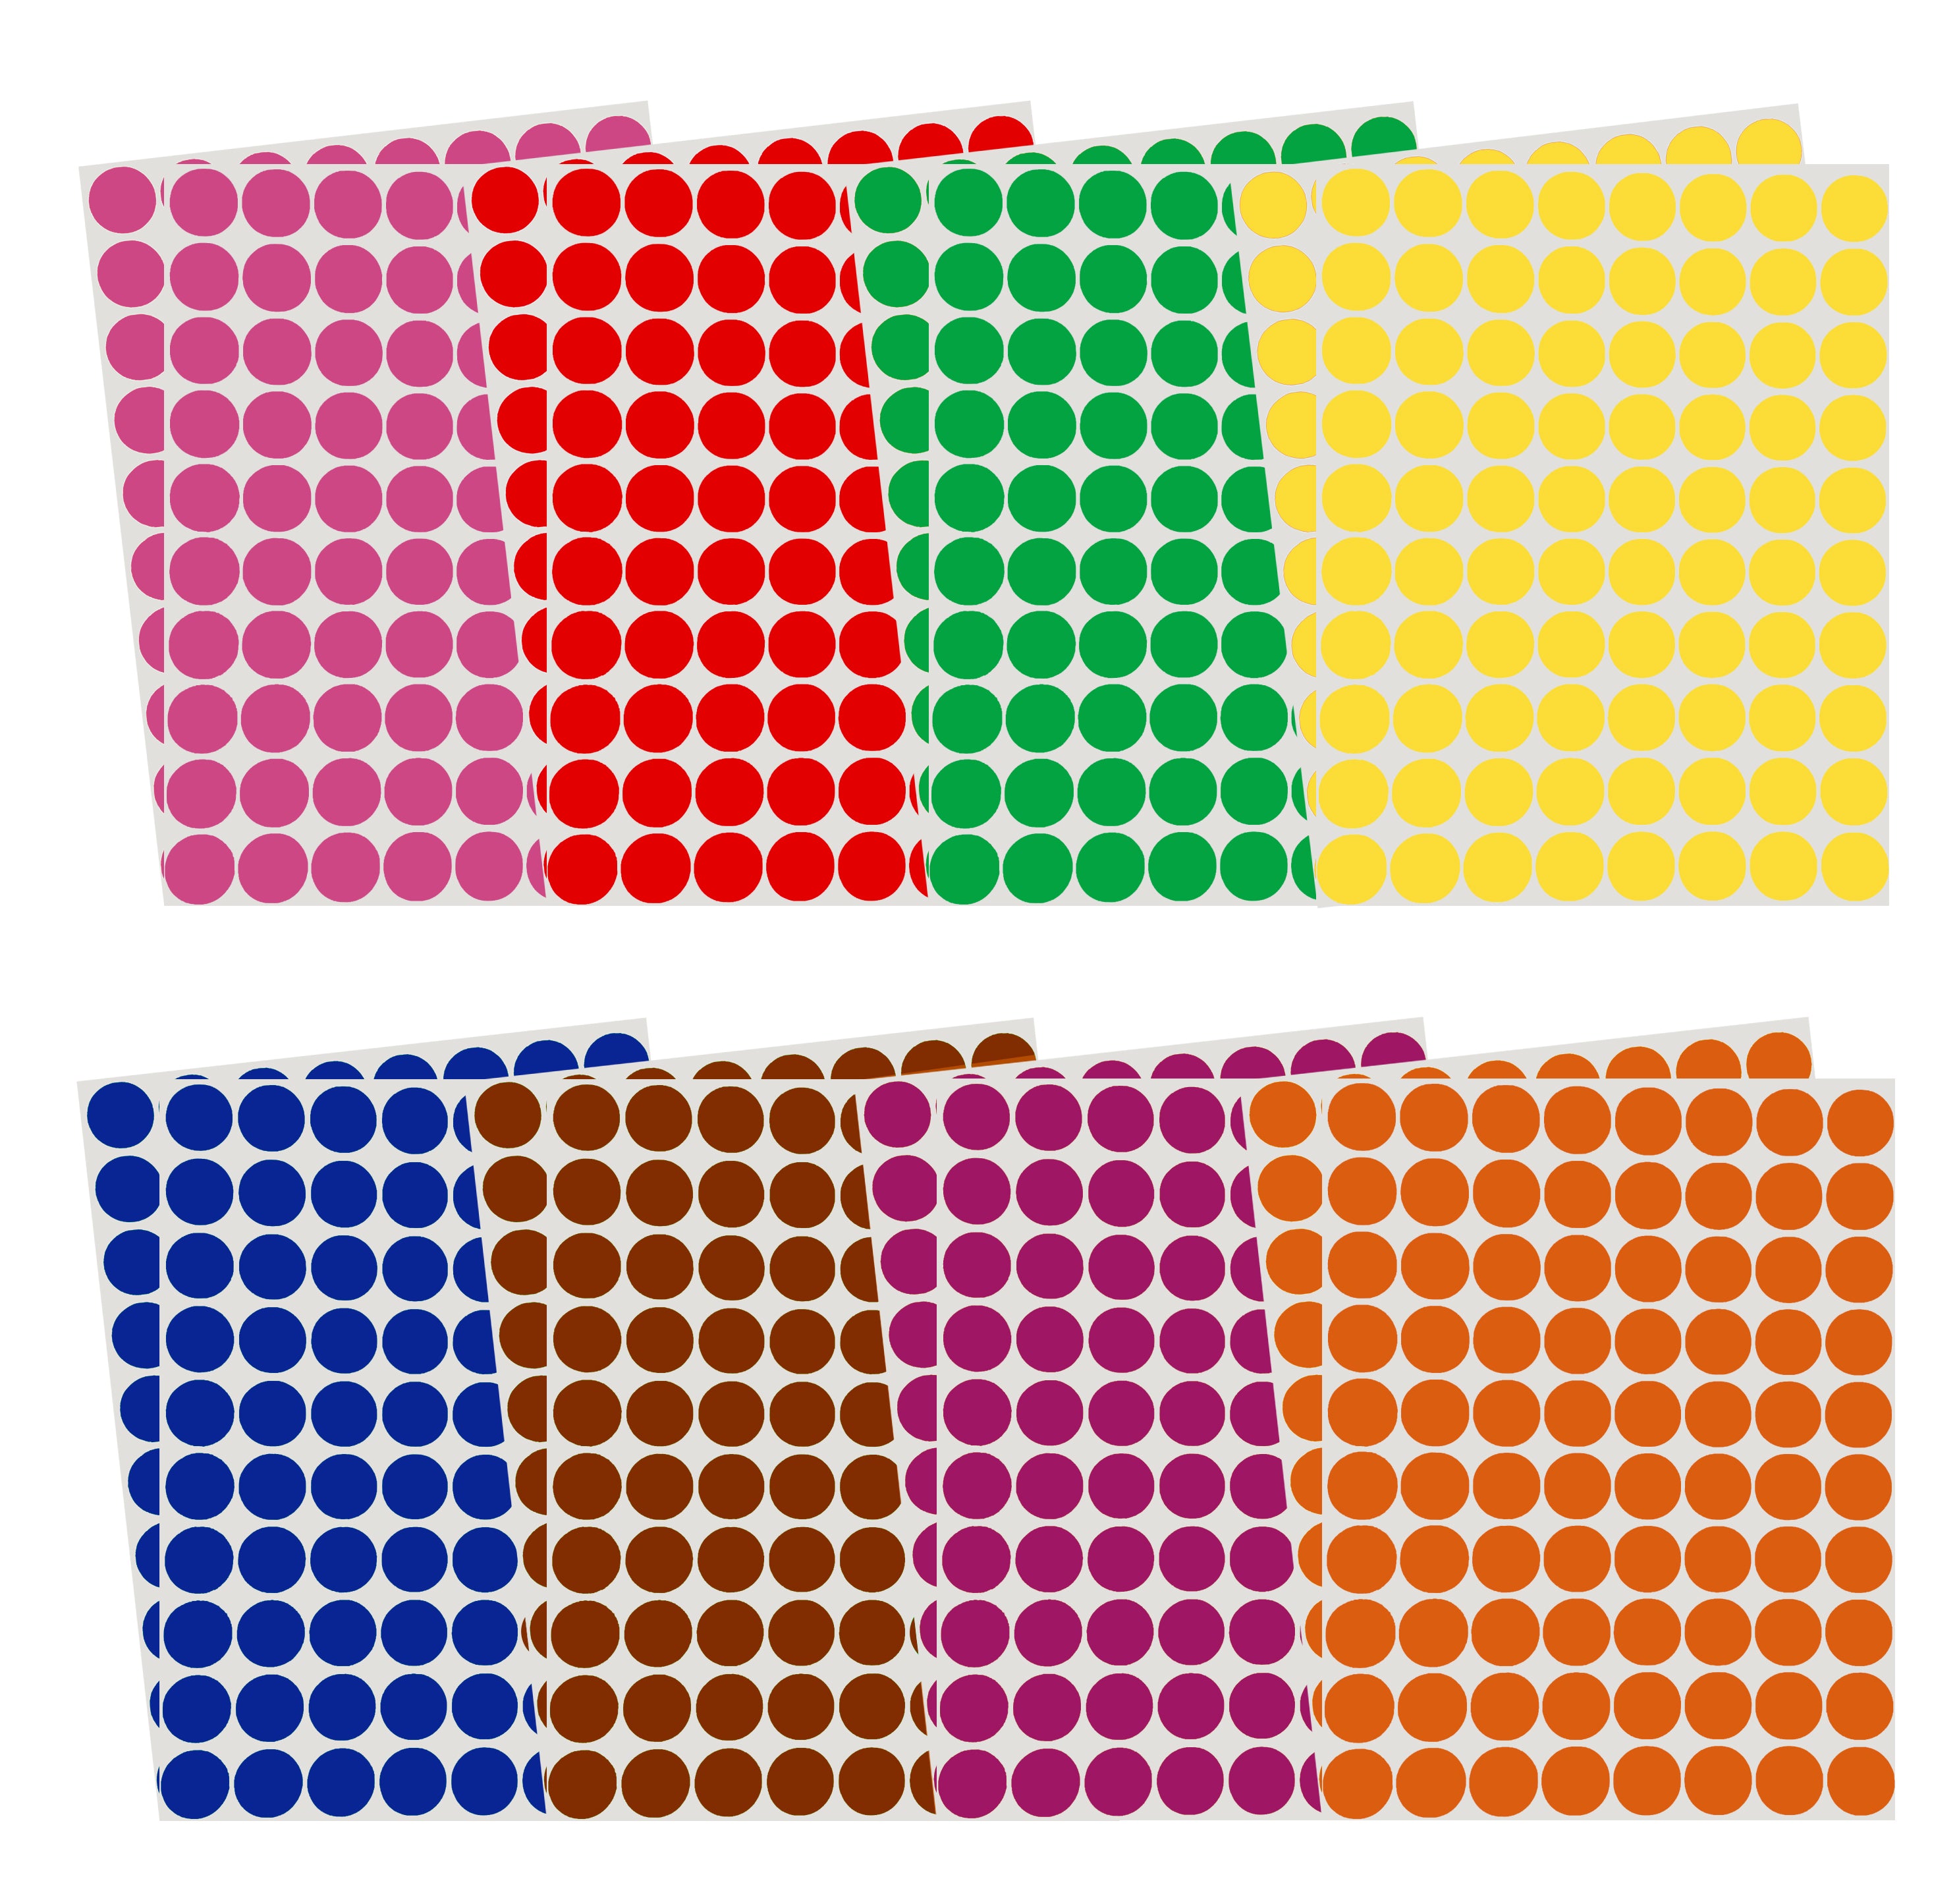 Royal Green Kids Colored Round Dots inch (0.5) Art Crafts and Games Stickers -1280 Pack 15 Colors 16 Sheets